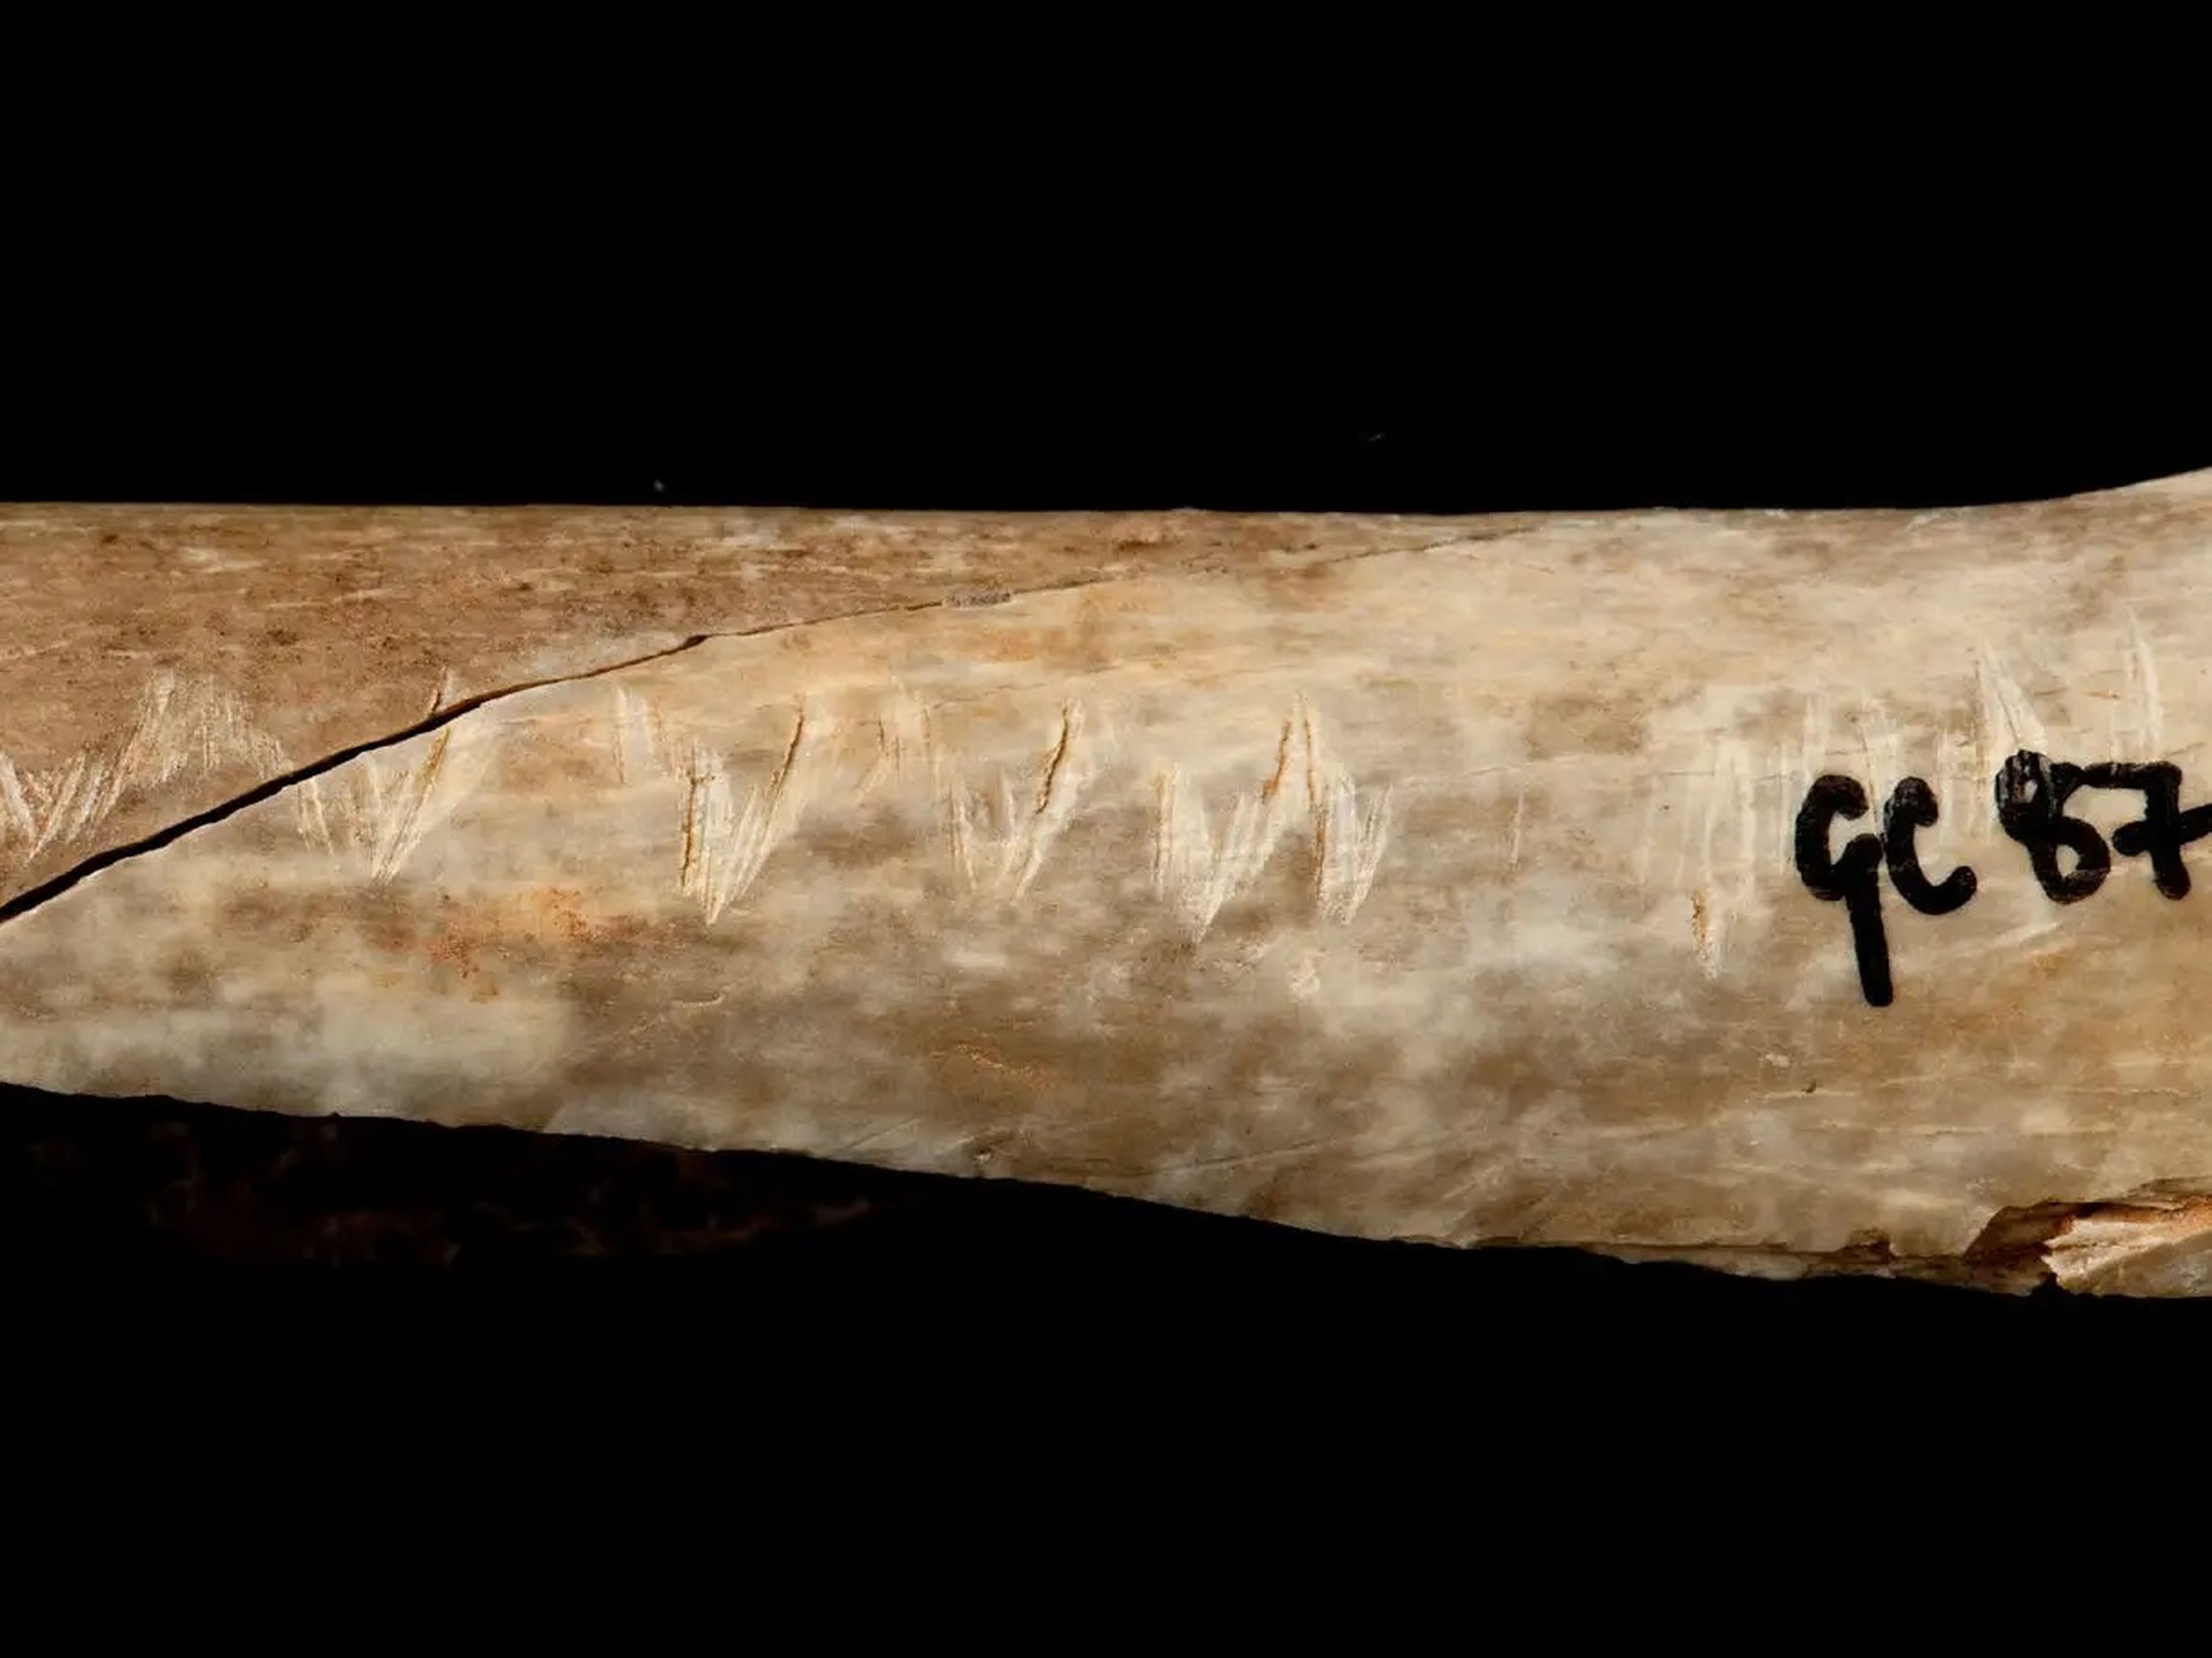 A bone from the Upper Palaeolithic Era engraved with markings associated with ritual cannibalism.